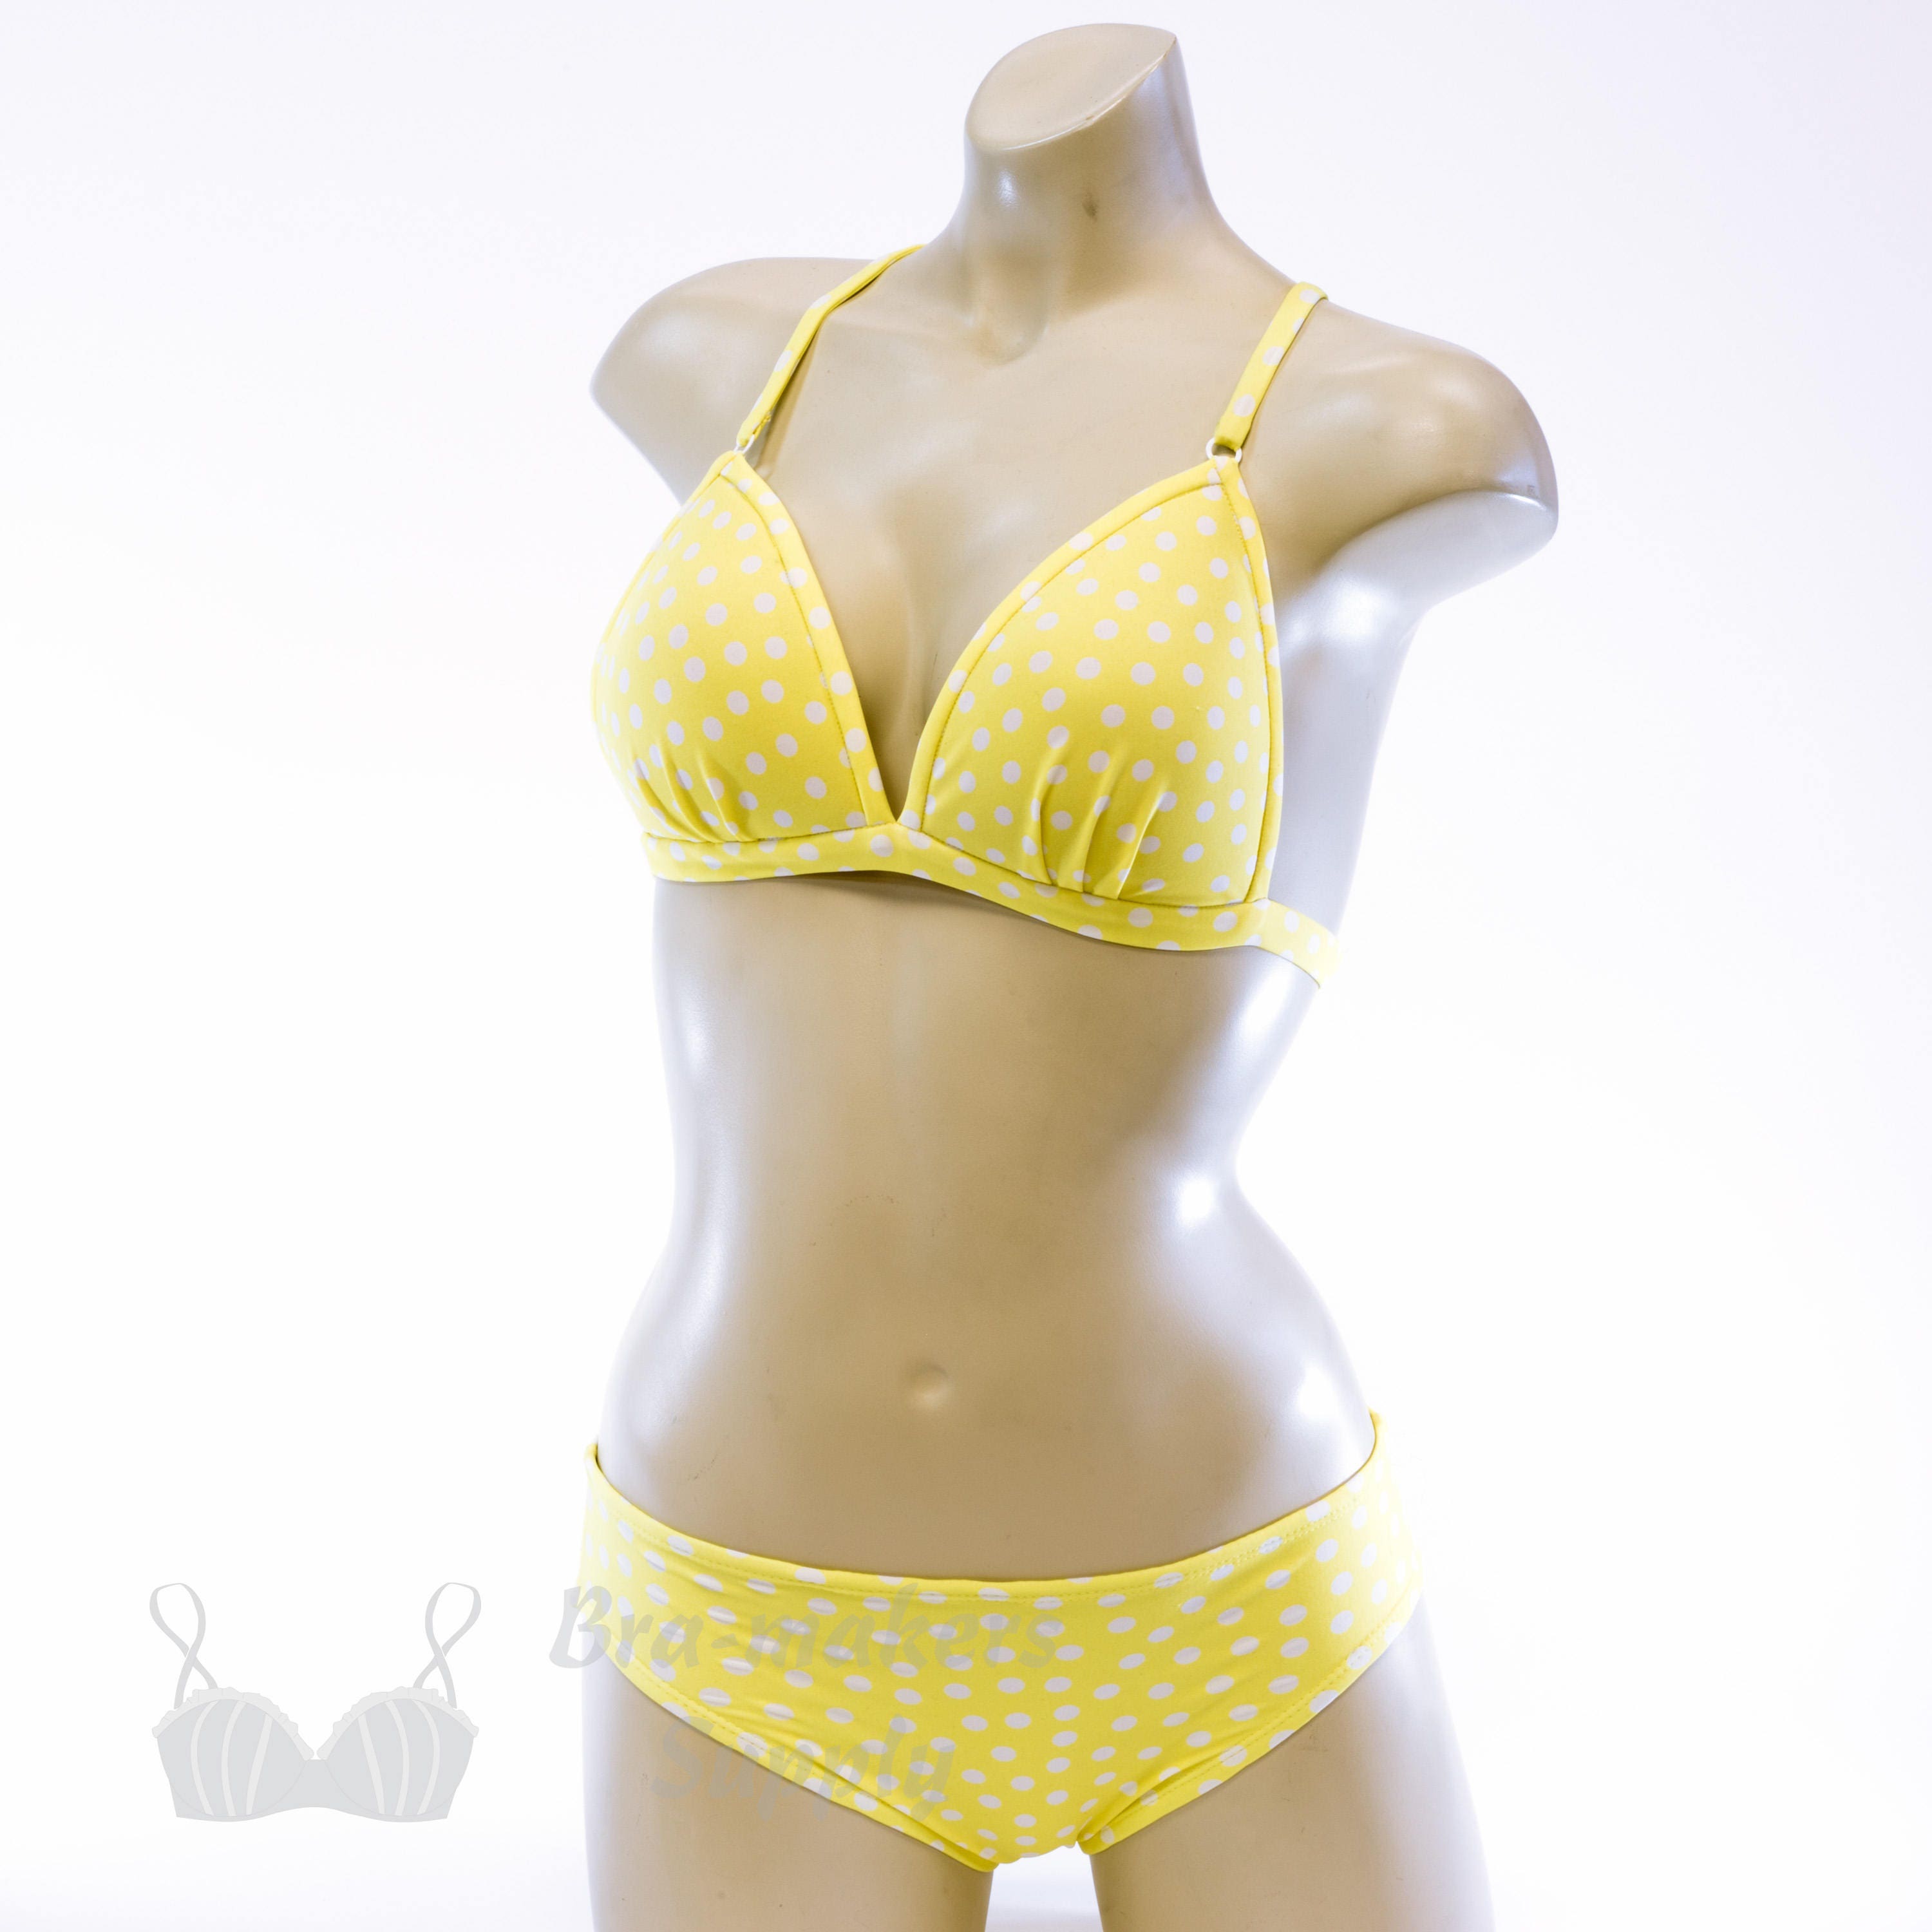 LINDA Underwired Bra Pattern With Partial Band Pin up Girls